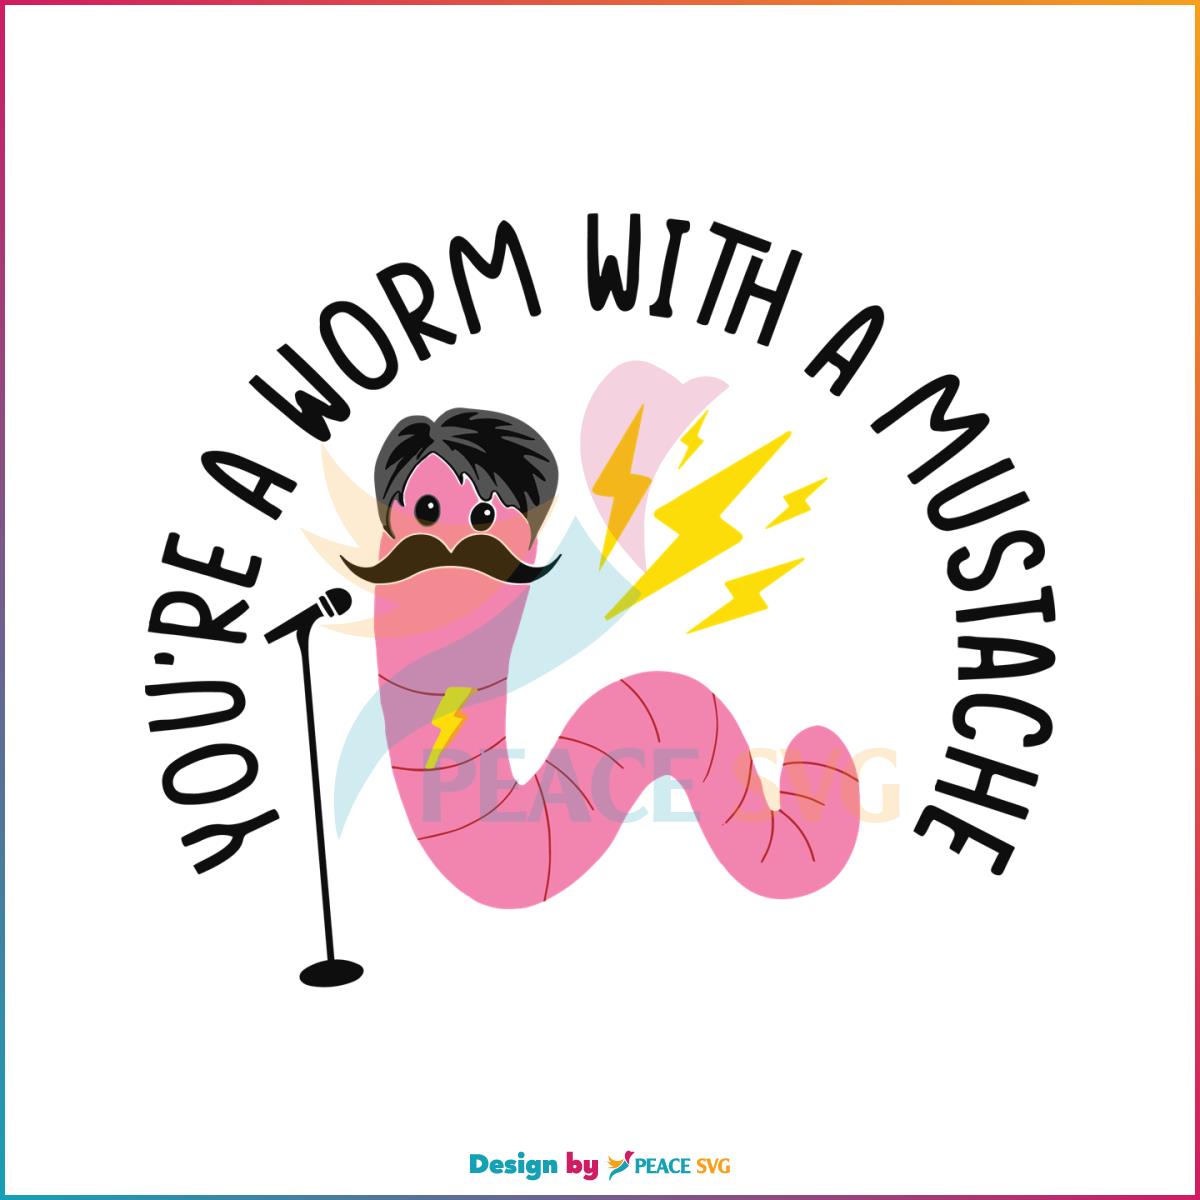 youre-a-worm-with-a-mustache-team-ariana-svg-cutting-file